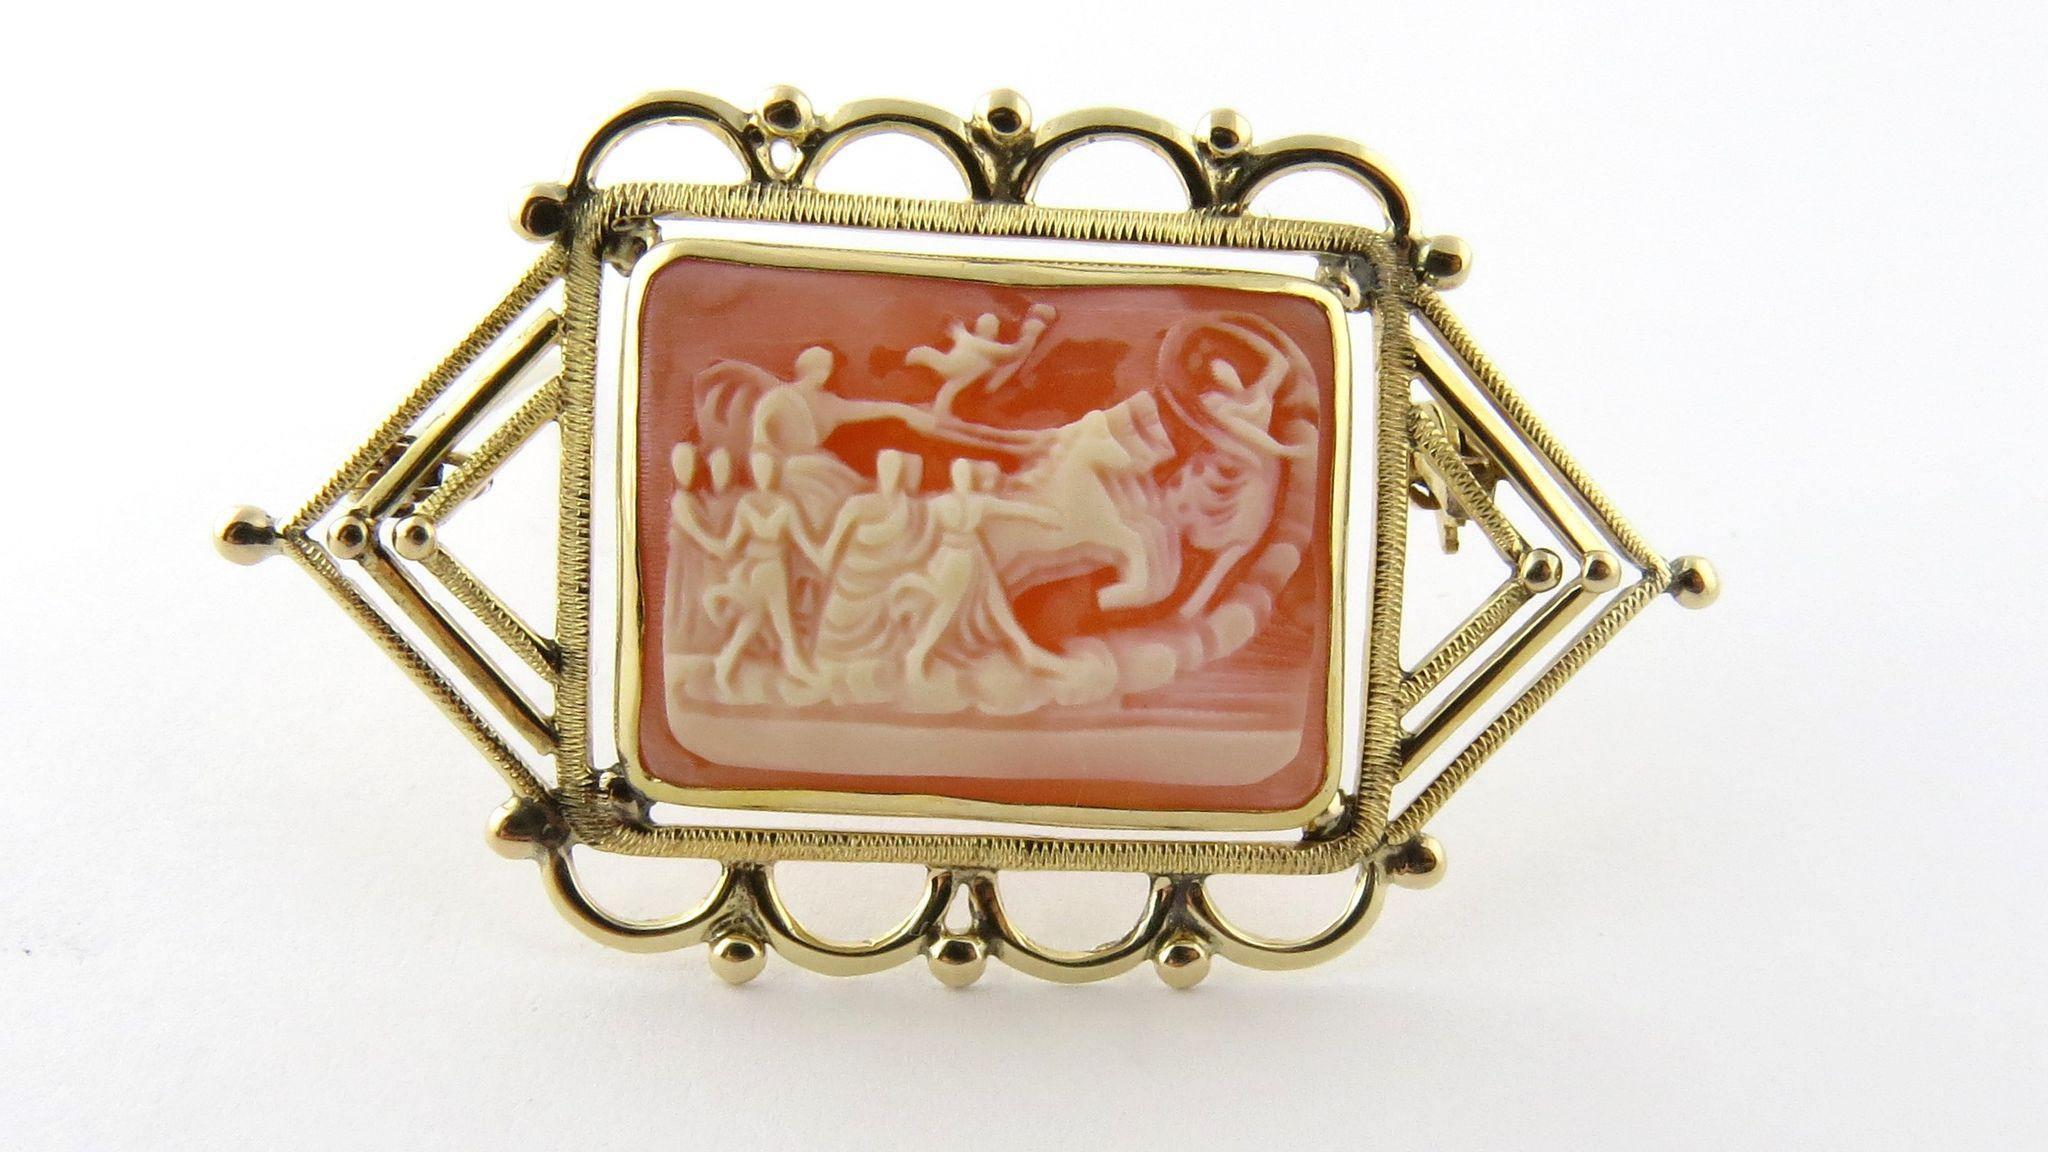 Artfully designed handmade 14K yellow gold frame brooch houses a skillfully carved cameo depicting a chariot scene. 

Vintage Cameo scene depicts a chariot with driver and three horses. Dancers to the side and front of the chariot and an